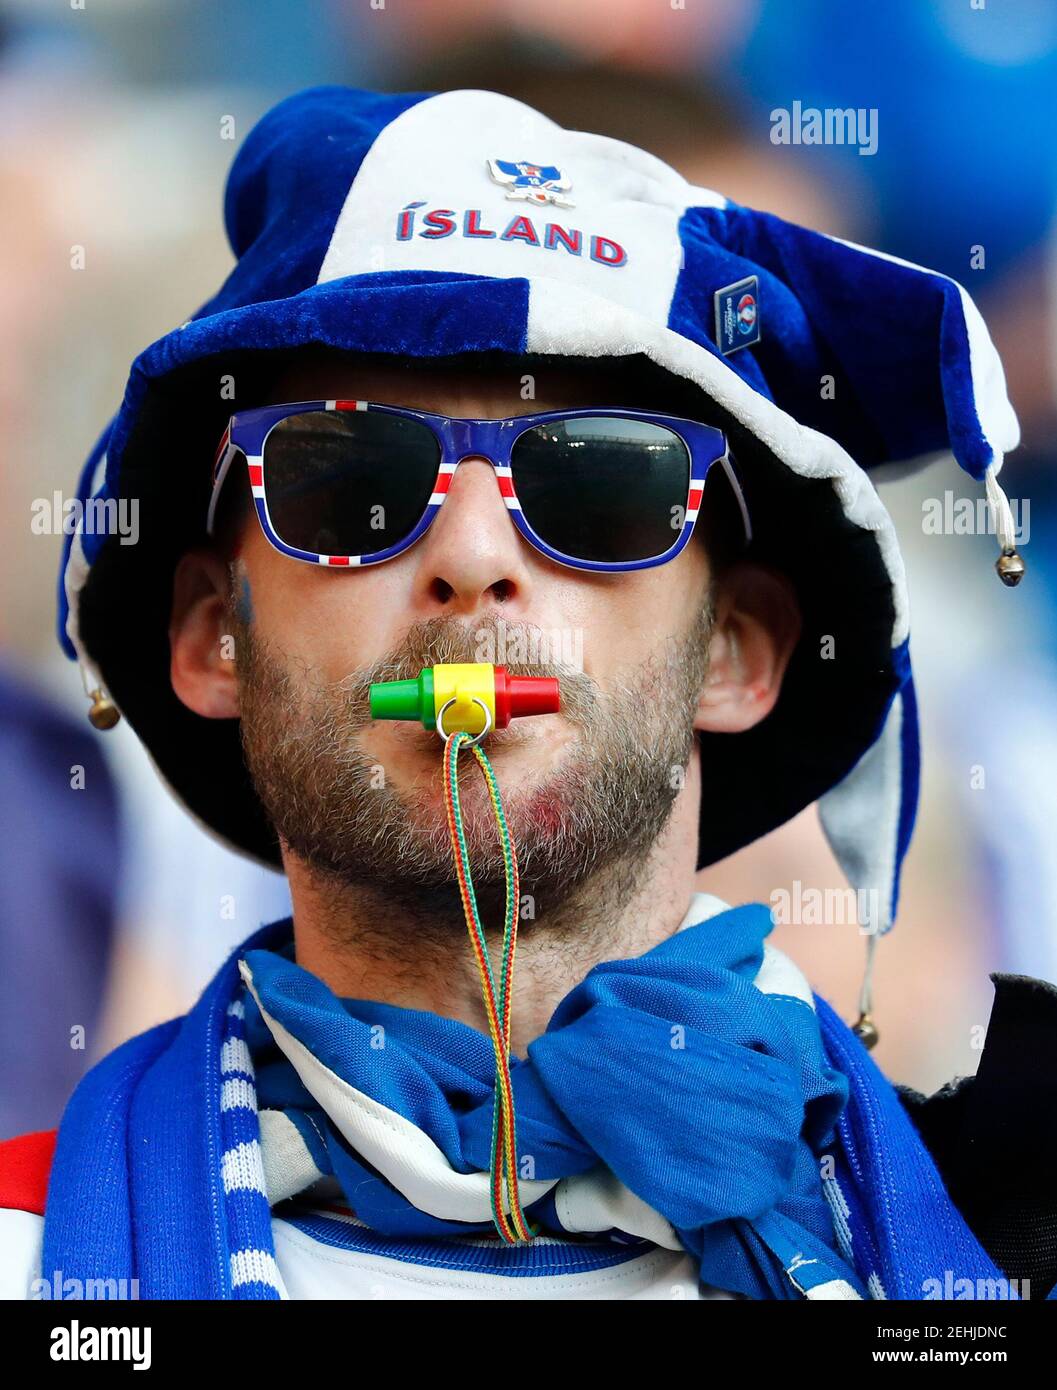 Football Soccer - England v Iceland - EURO 2016 - Round of 16 - Stade de Nice, Nice, France - 27/6/16  Iceland fan before the match  REUTERS/Michael Dalder  Livepic Stock Photo